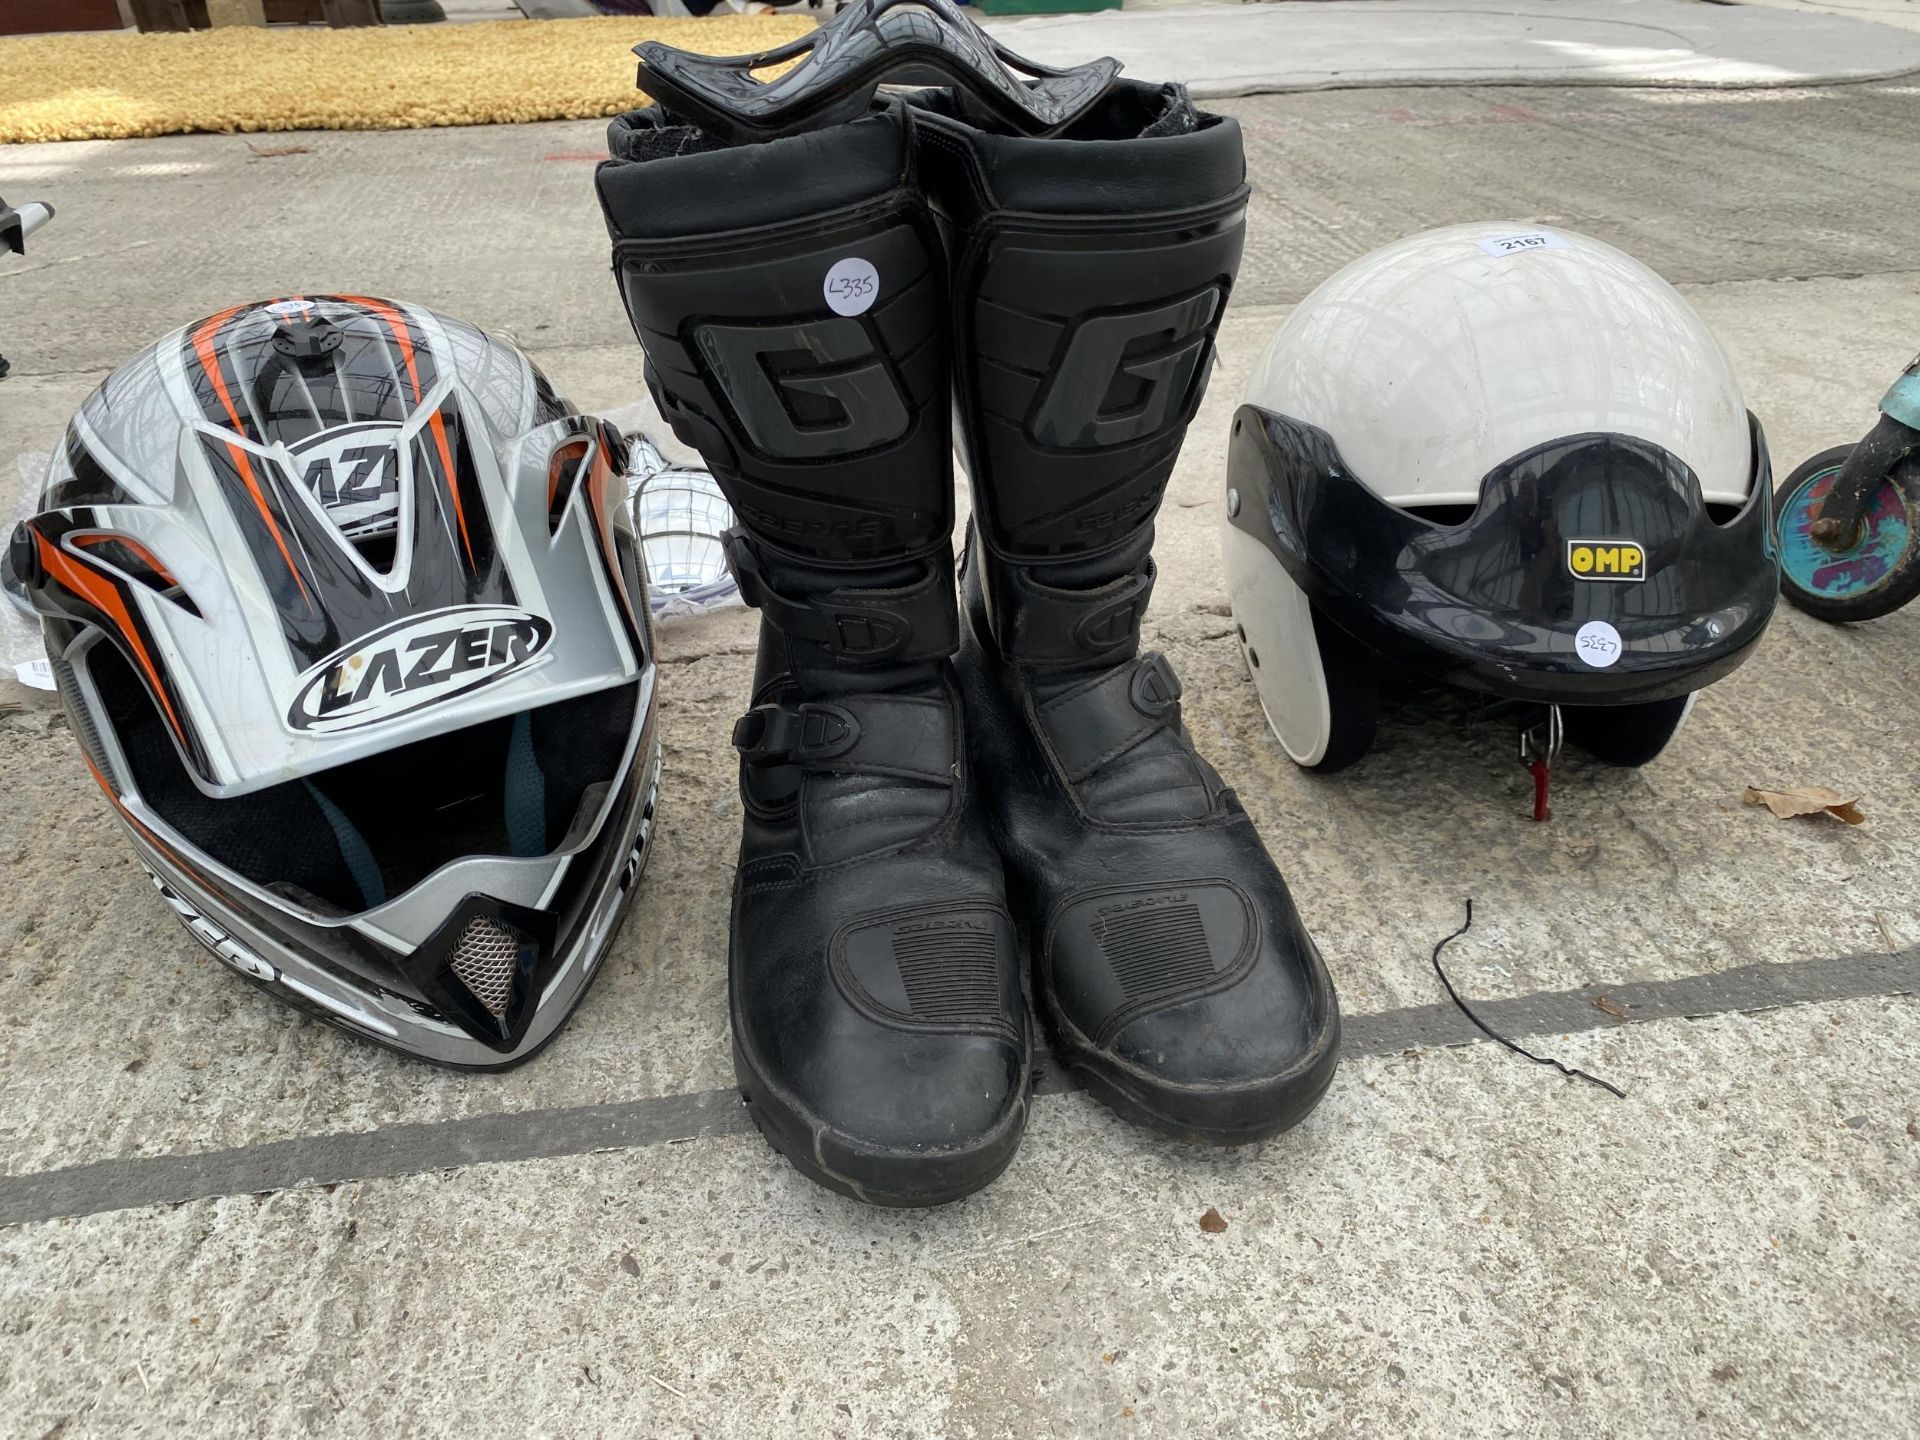 TWO MOTORBIKE HELMETS AND A PAIR OF BOOTS